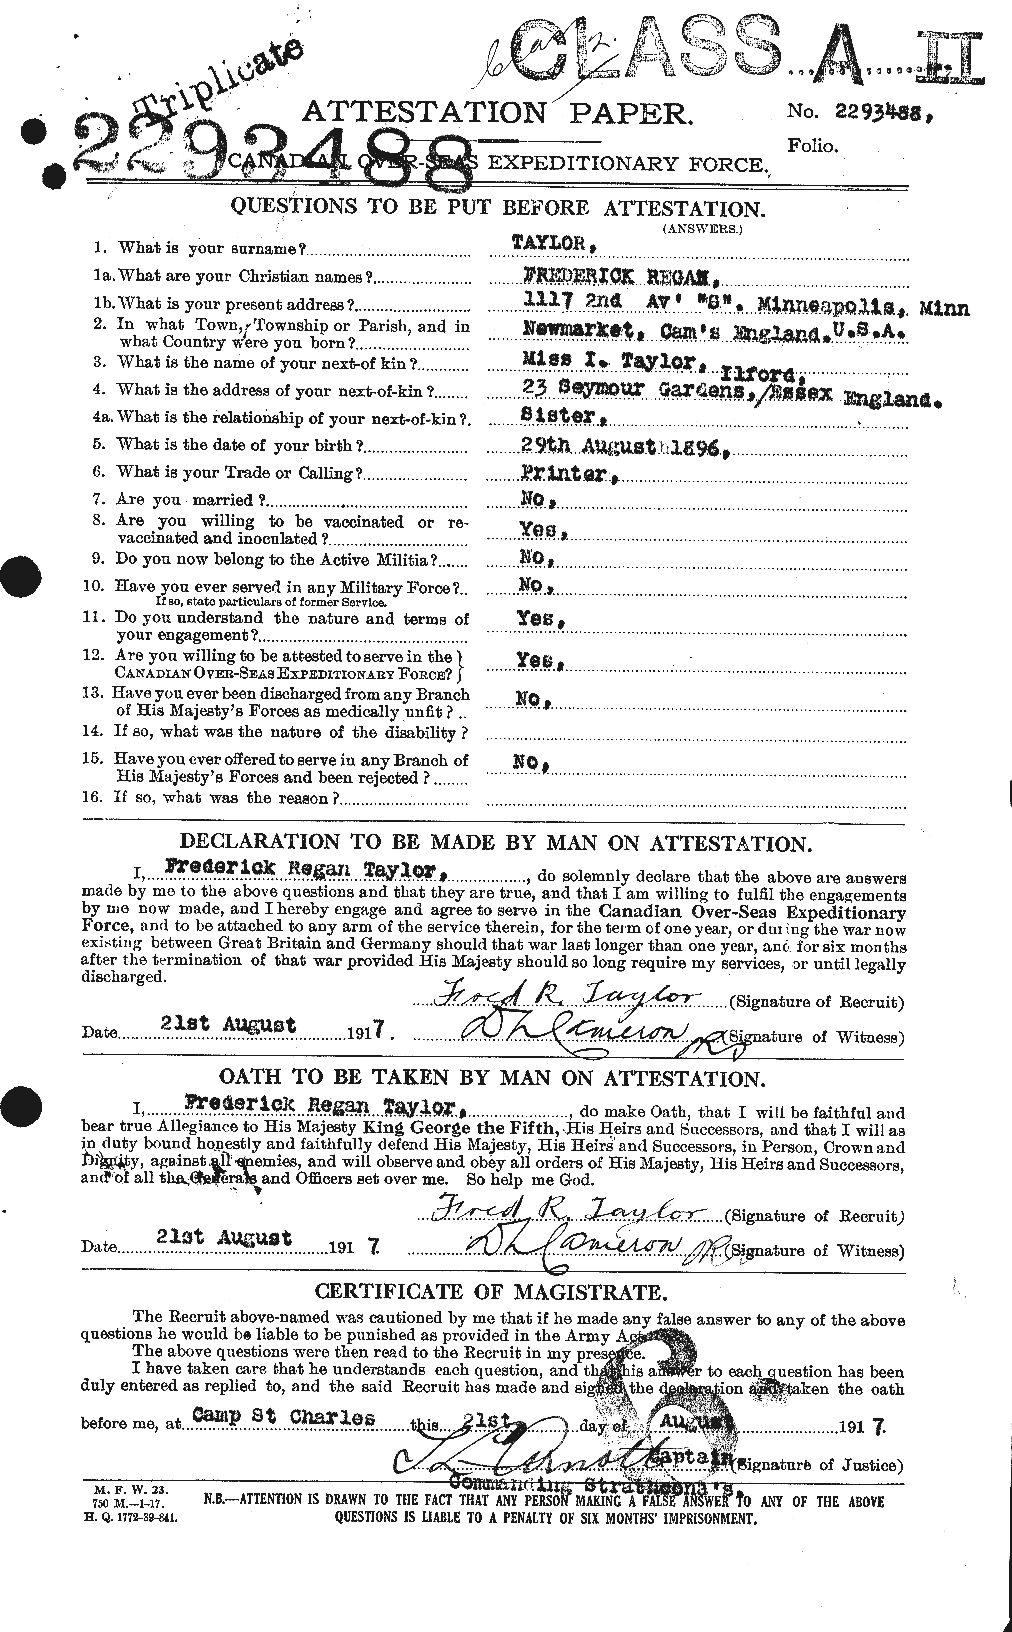 Personnel Records of the First World War - CEF 625816a